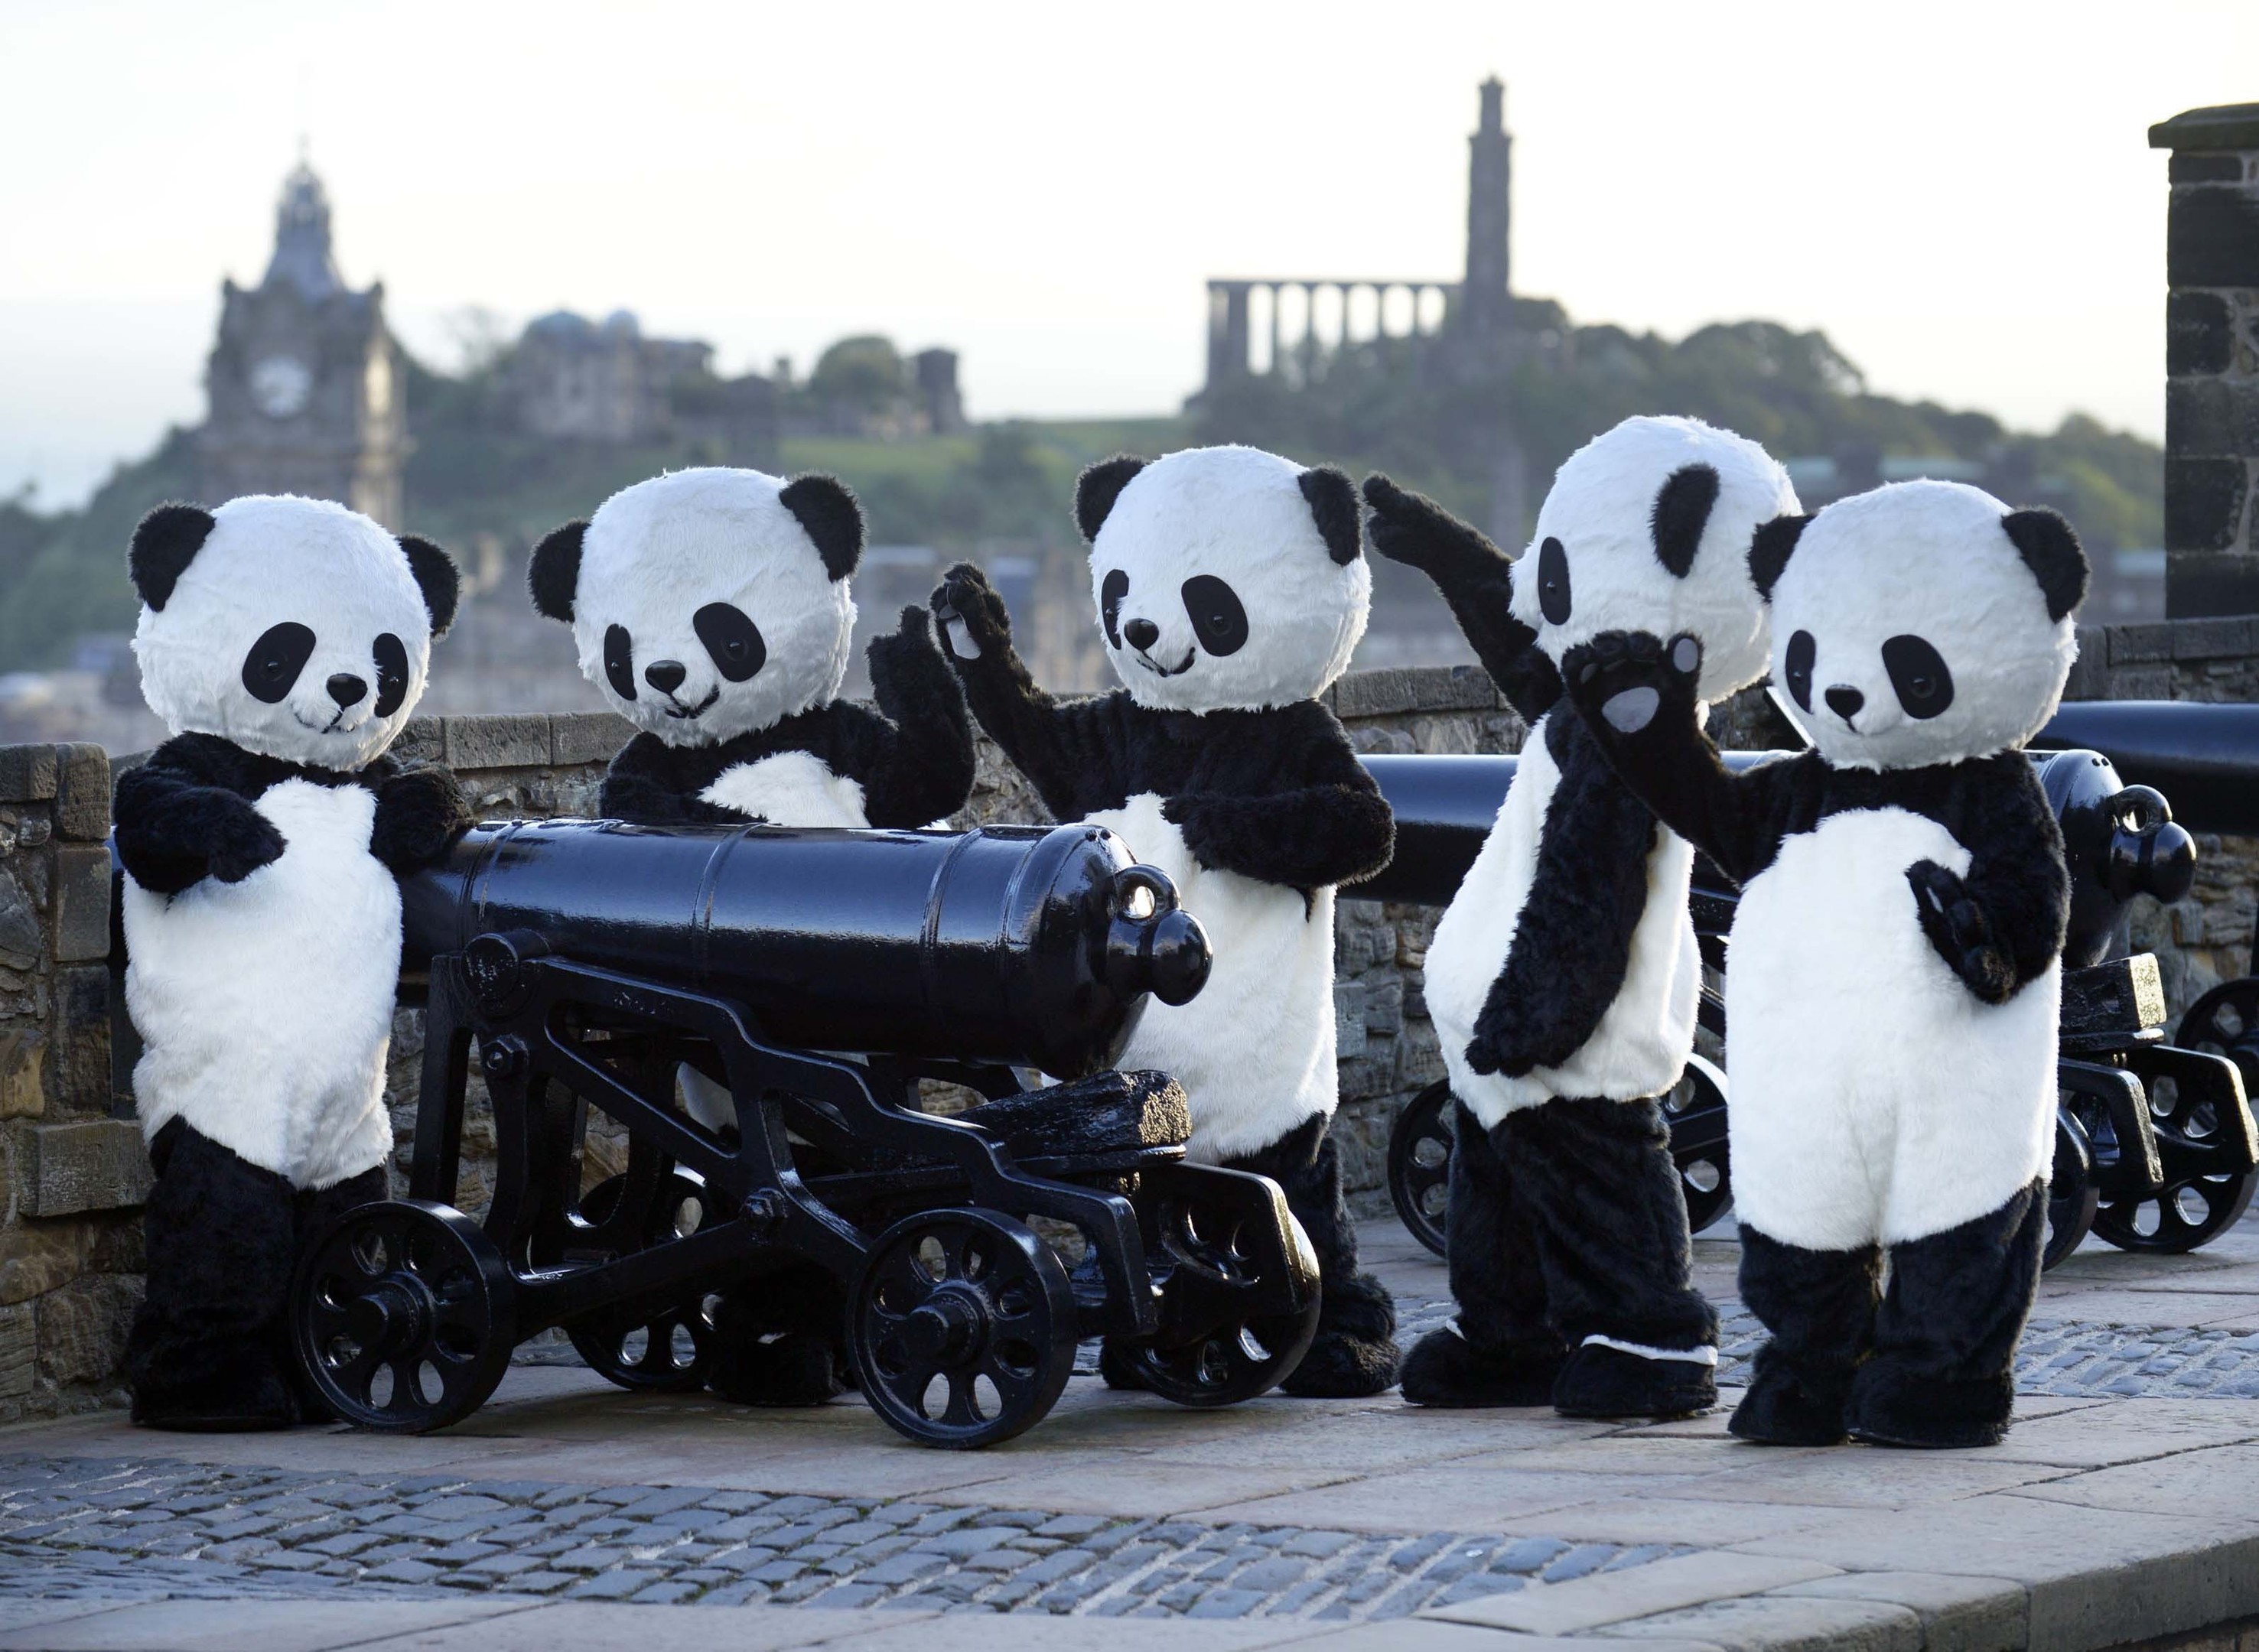 Performers in panda costumes at Edinburgh Castle, Scotland to highlight the launch of a Europe-wide search for a group of Panda Ambassadors to win the chance to visit Chengdu Panda Base in China and work on a conservation project (PA)